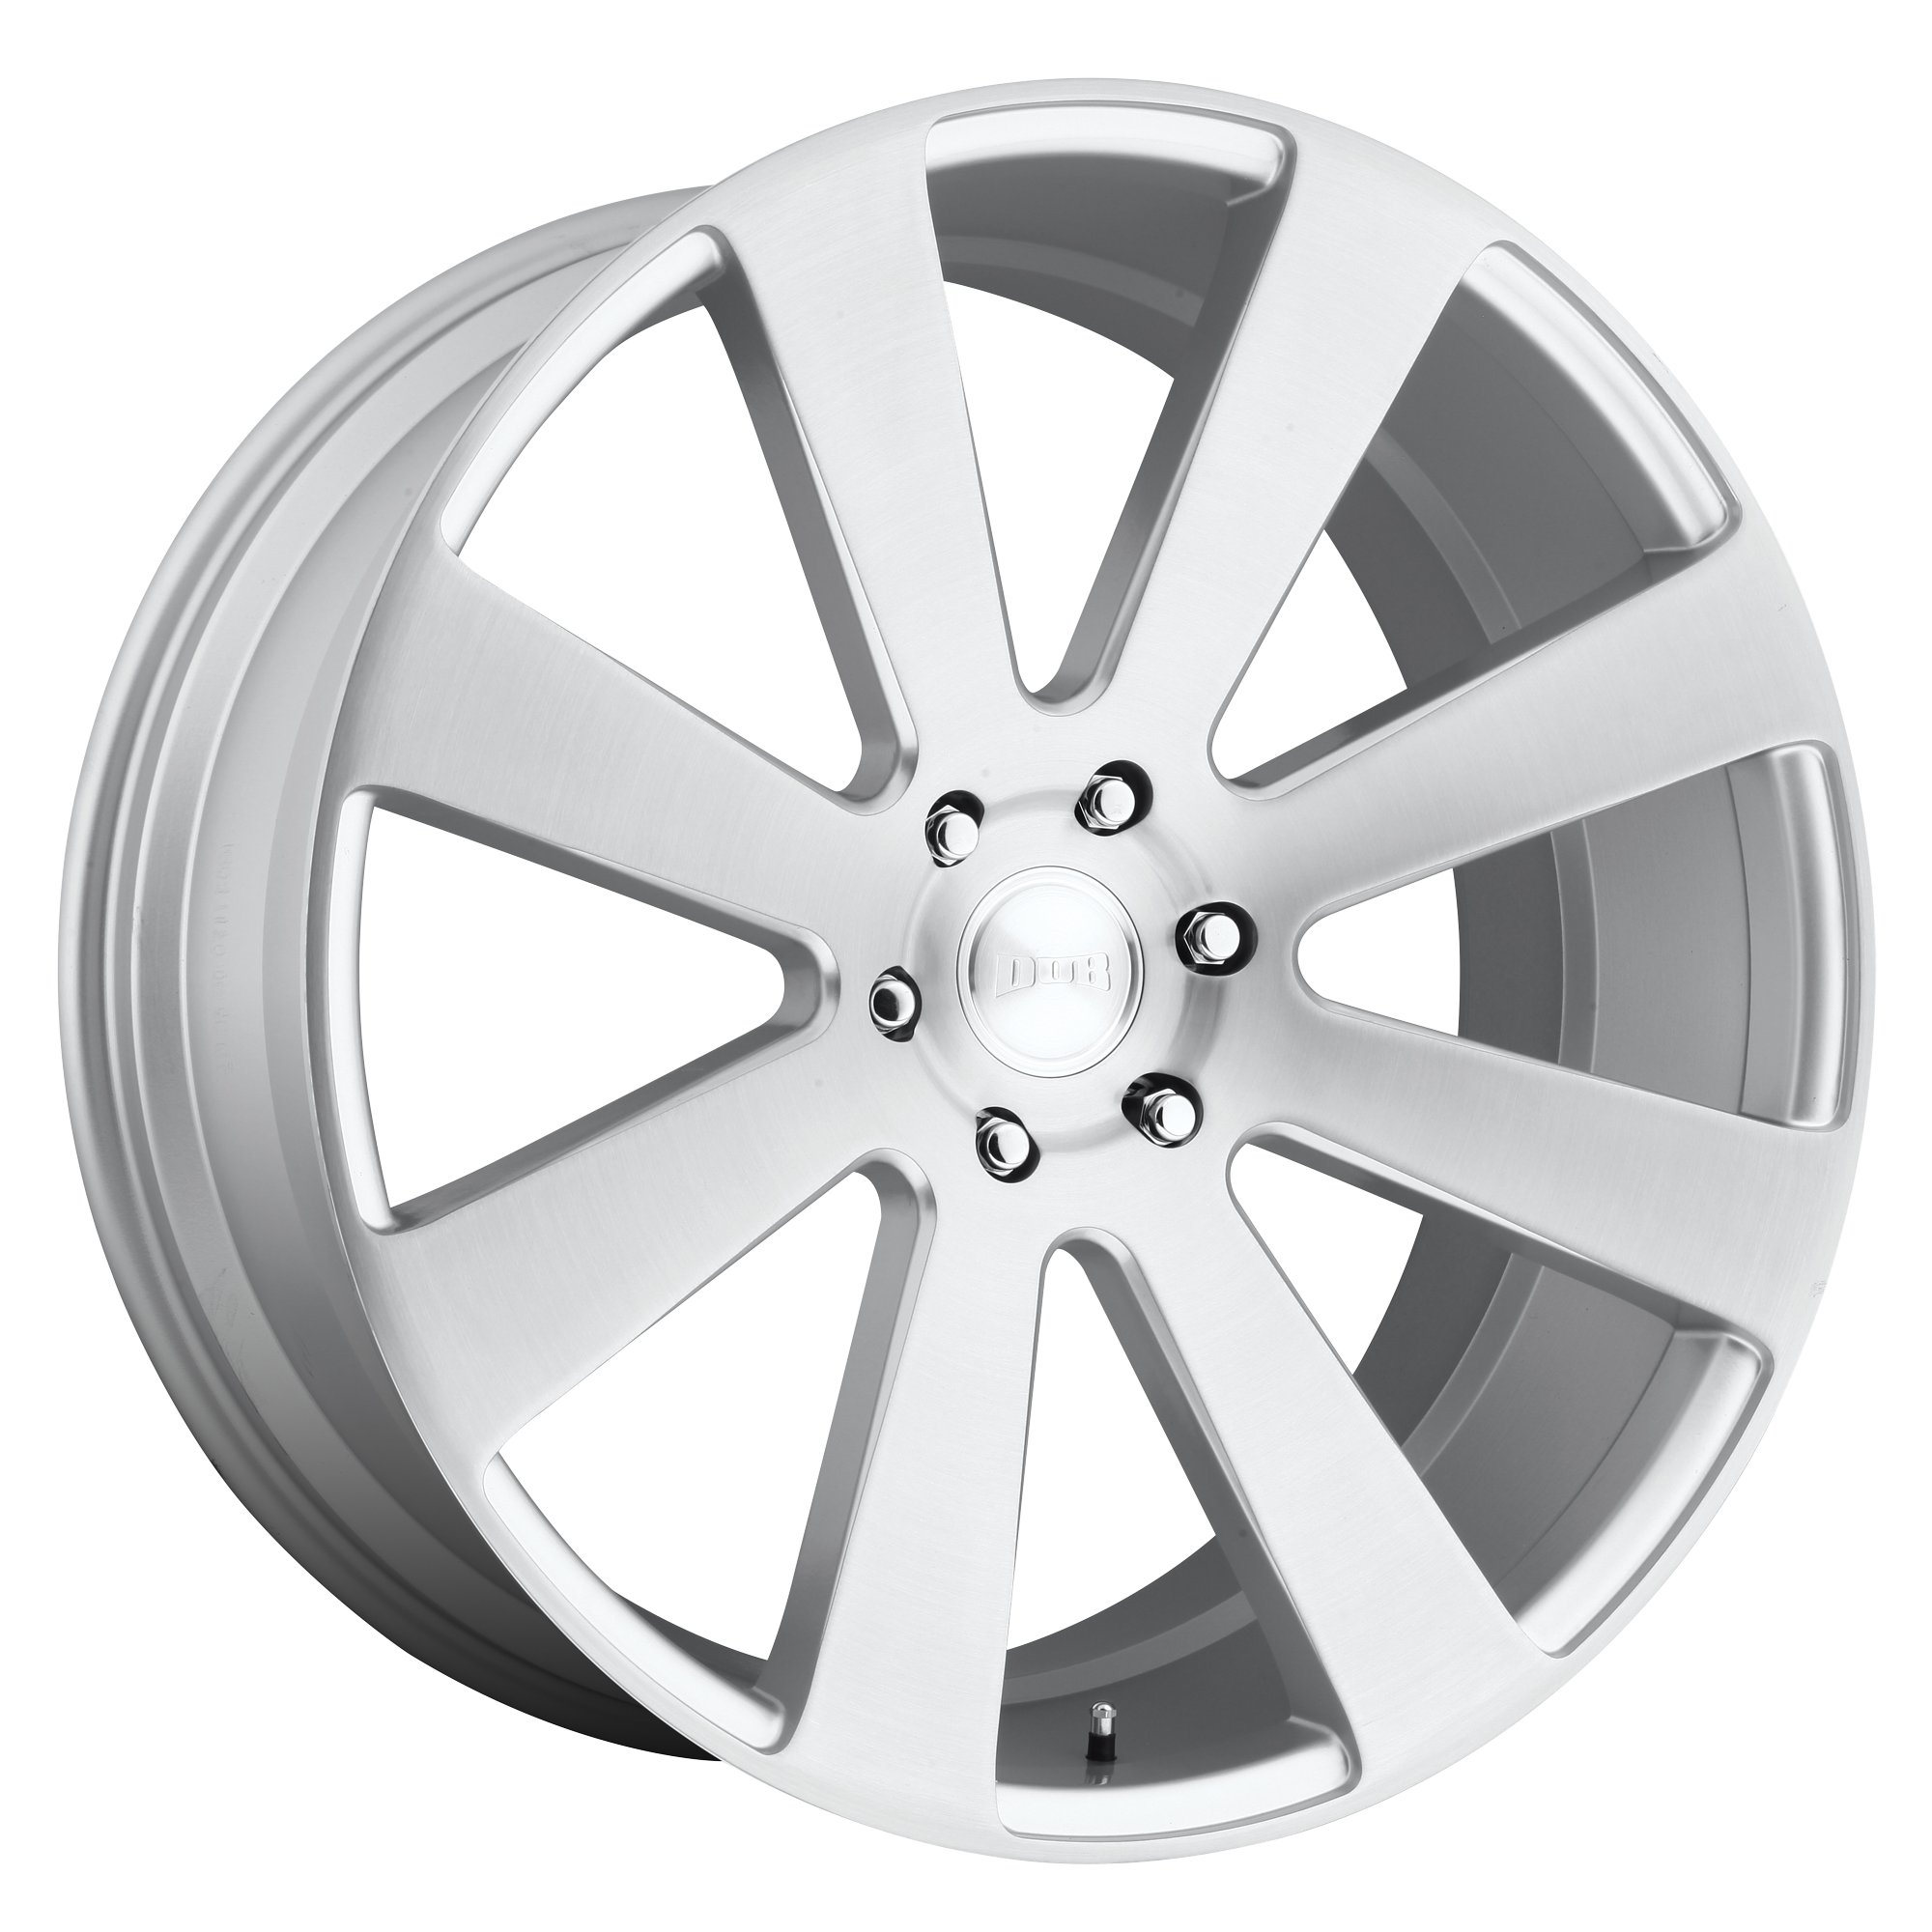 8-BALL 24x10 6x139.70 GLOSS SILVER BRUSHED (20 mm) - Tires and Engine Performance